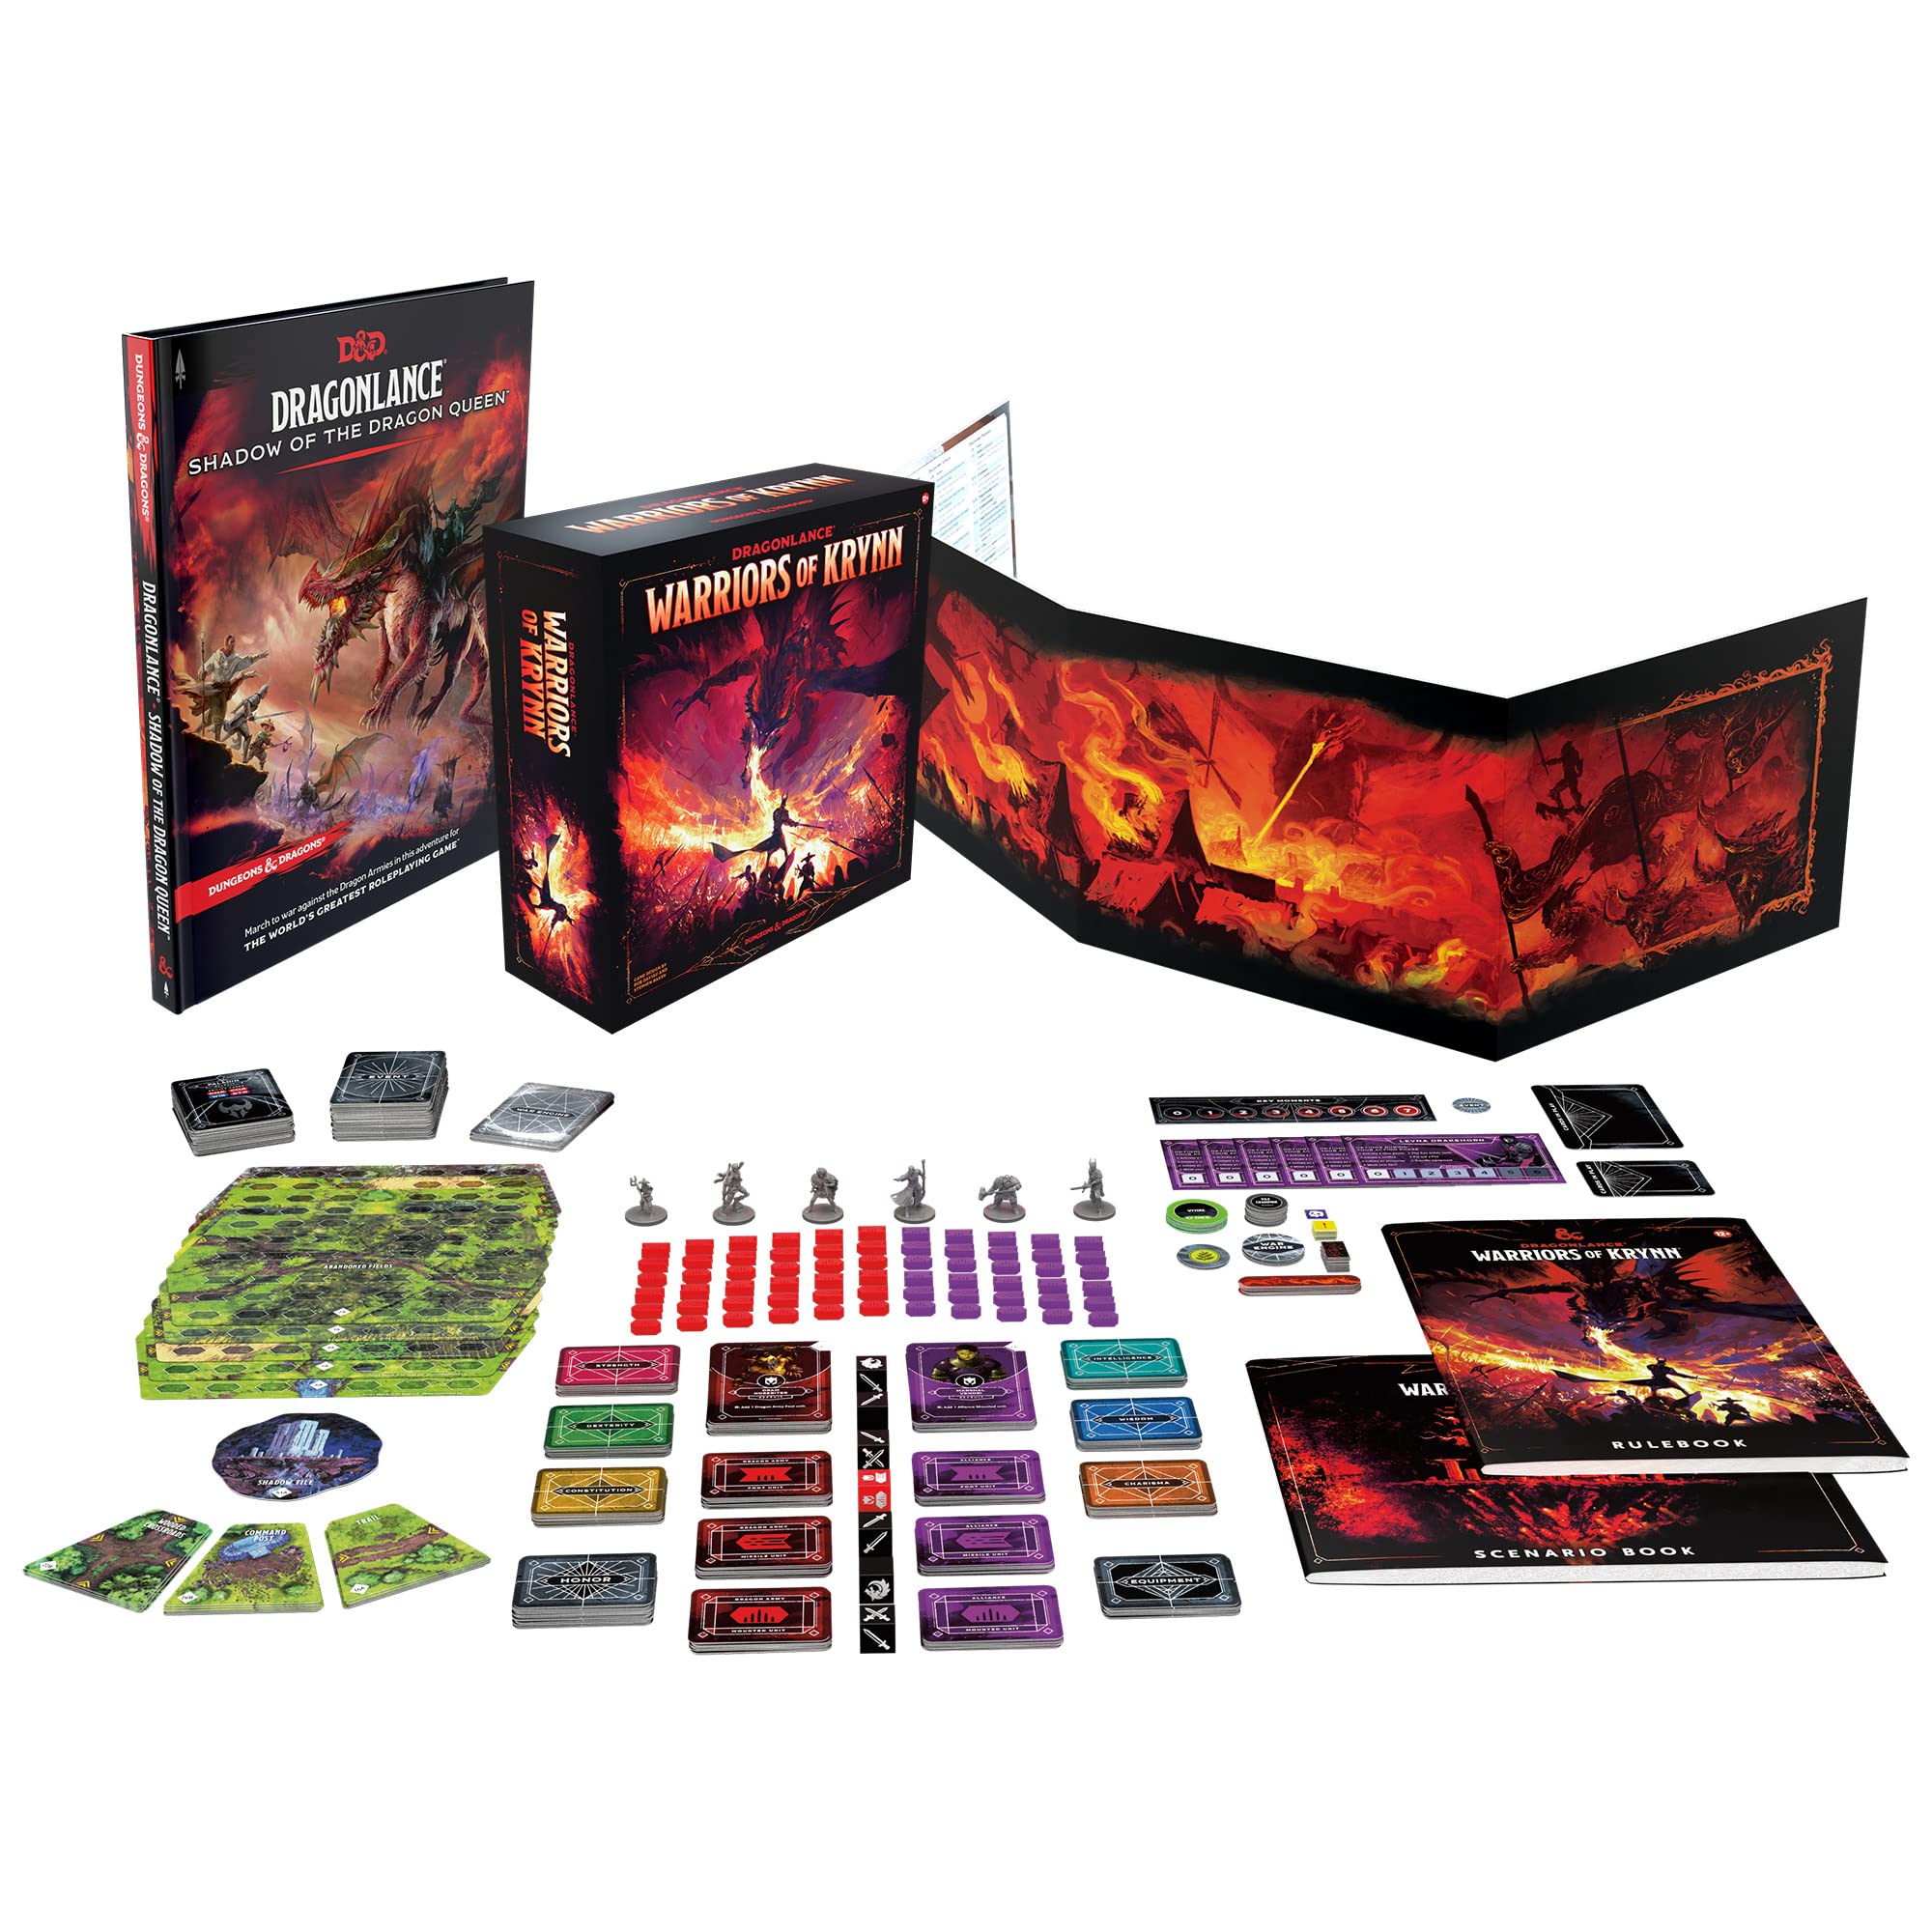 Prime Members: Dungeons & Dragons Dragonlance: Shadow of The Dragon Queen Deluxe Edition (D&D Adventure, DM Screen + Warriors of Krynn Board Game) $64.99 + Free Shipping